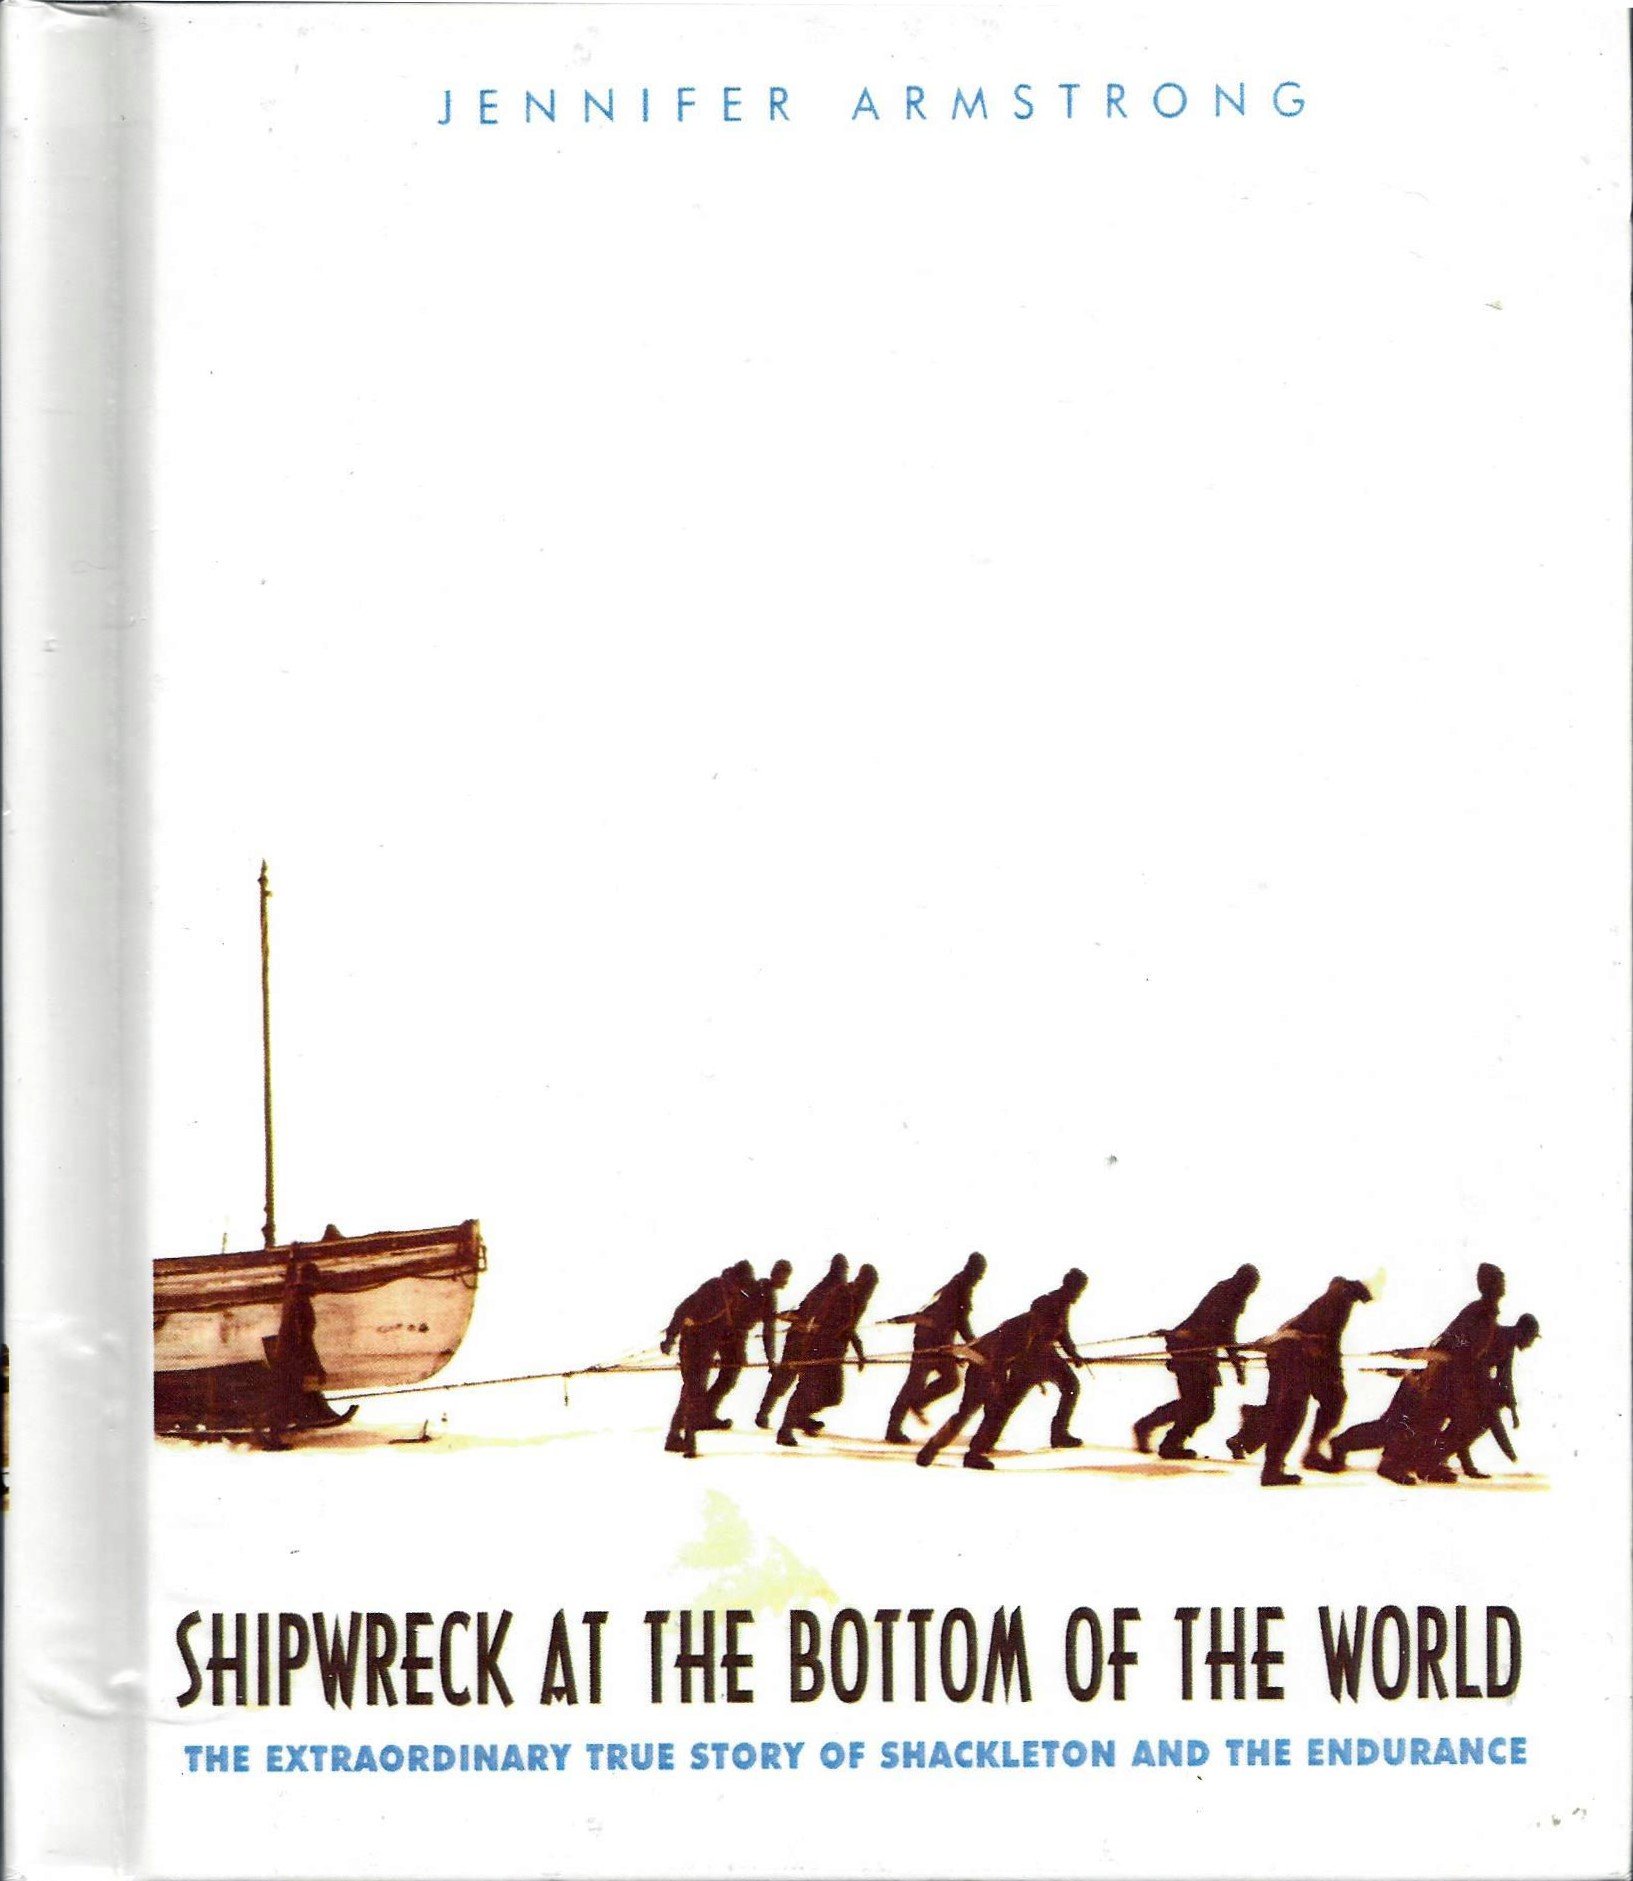 View description for 'Shipwreck at the Bottom of the World: The Extraordinary True Story of Shackleton and The Endurance'